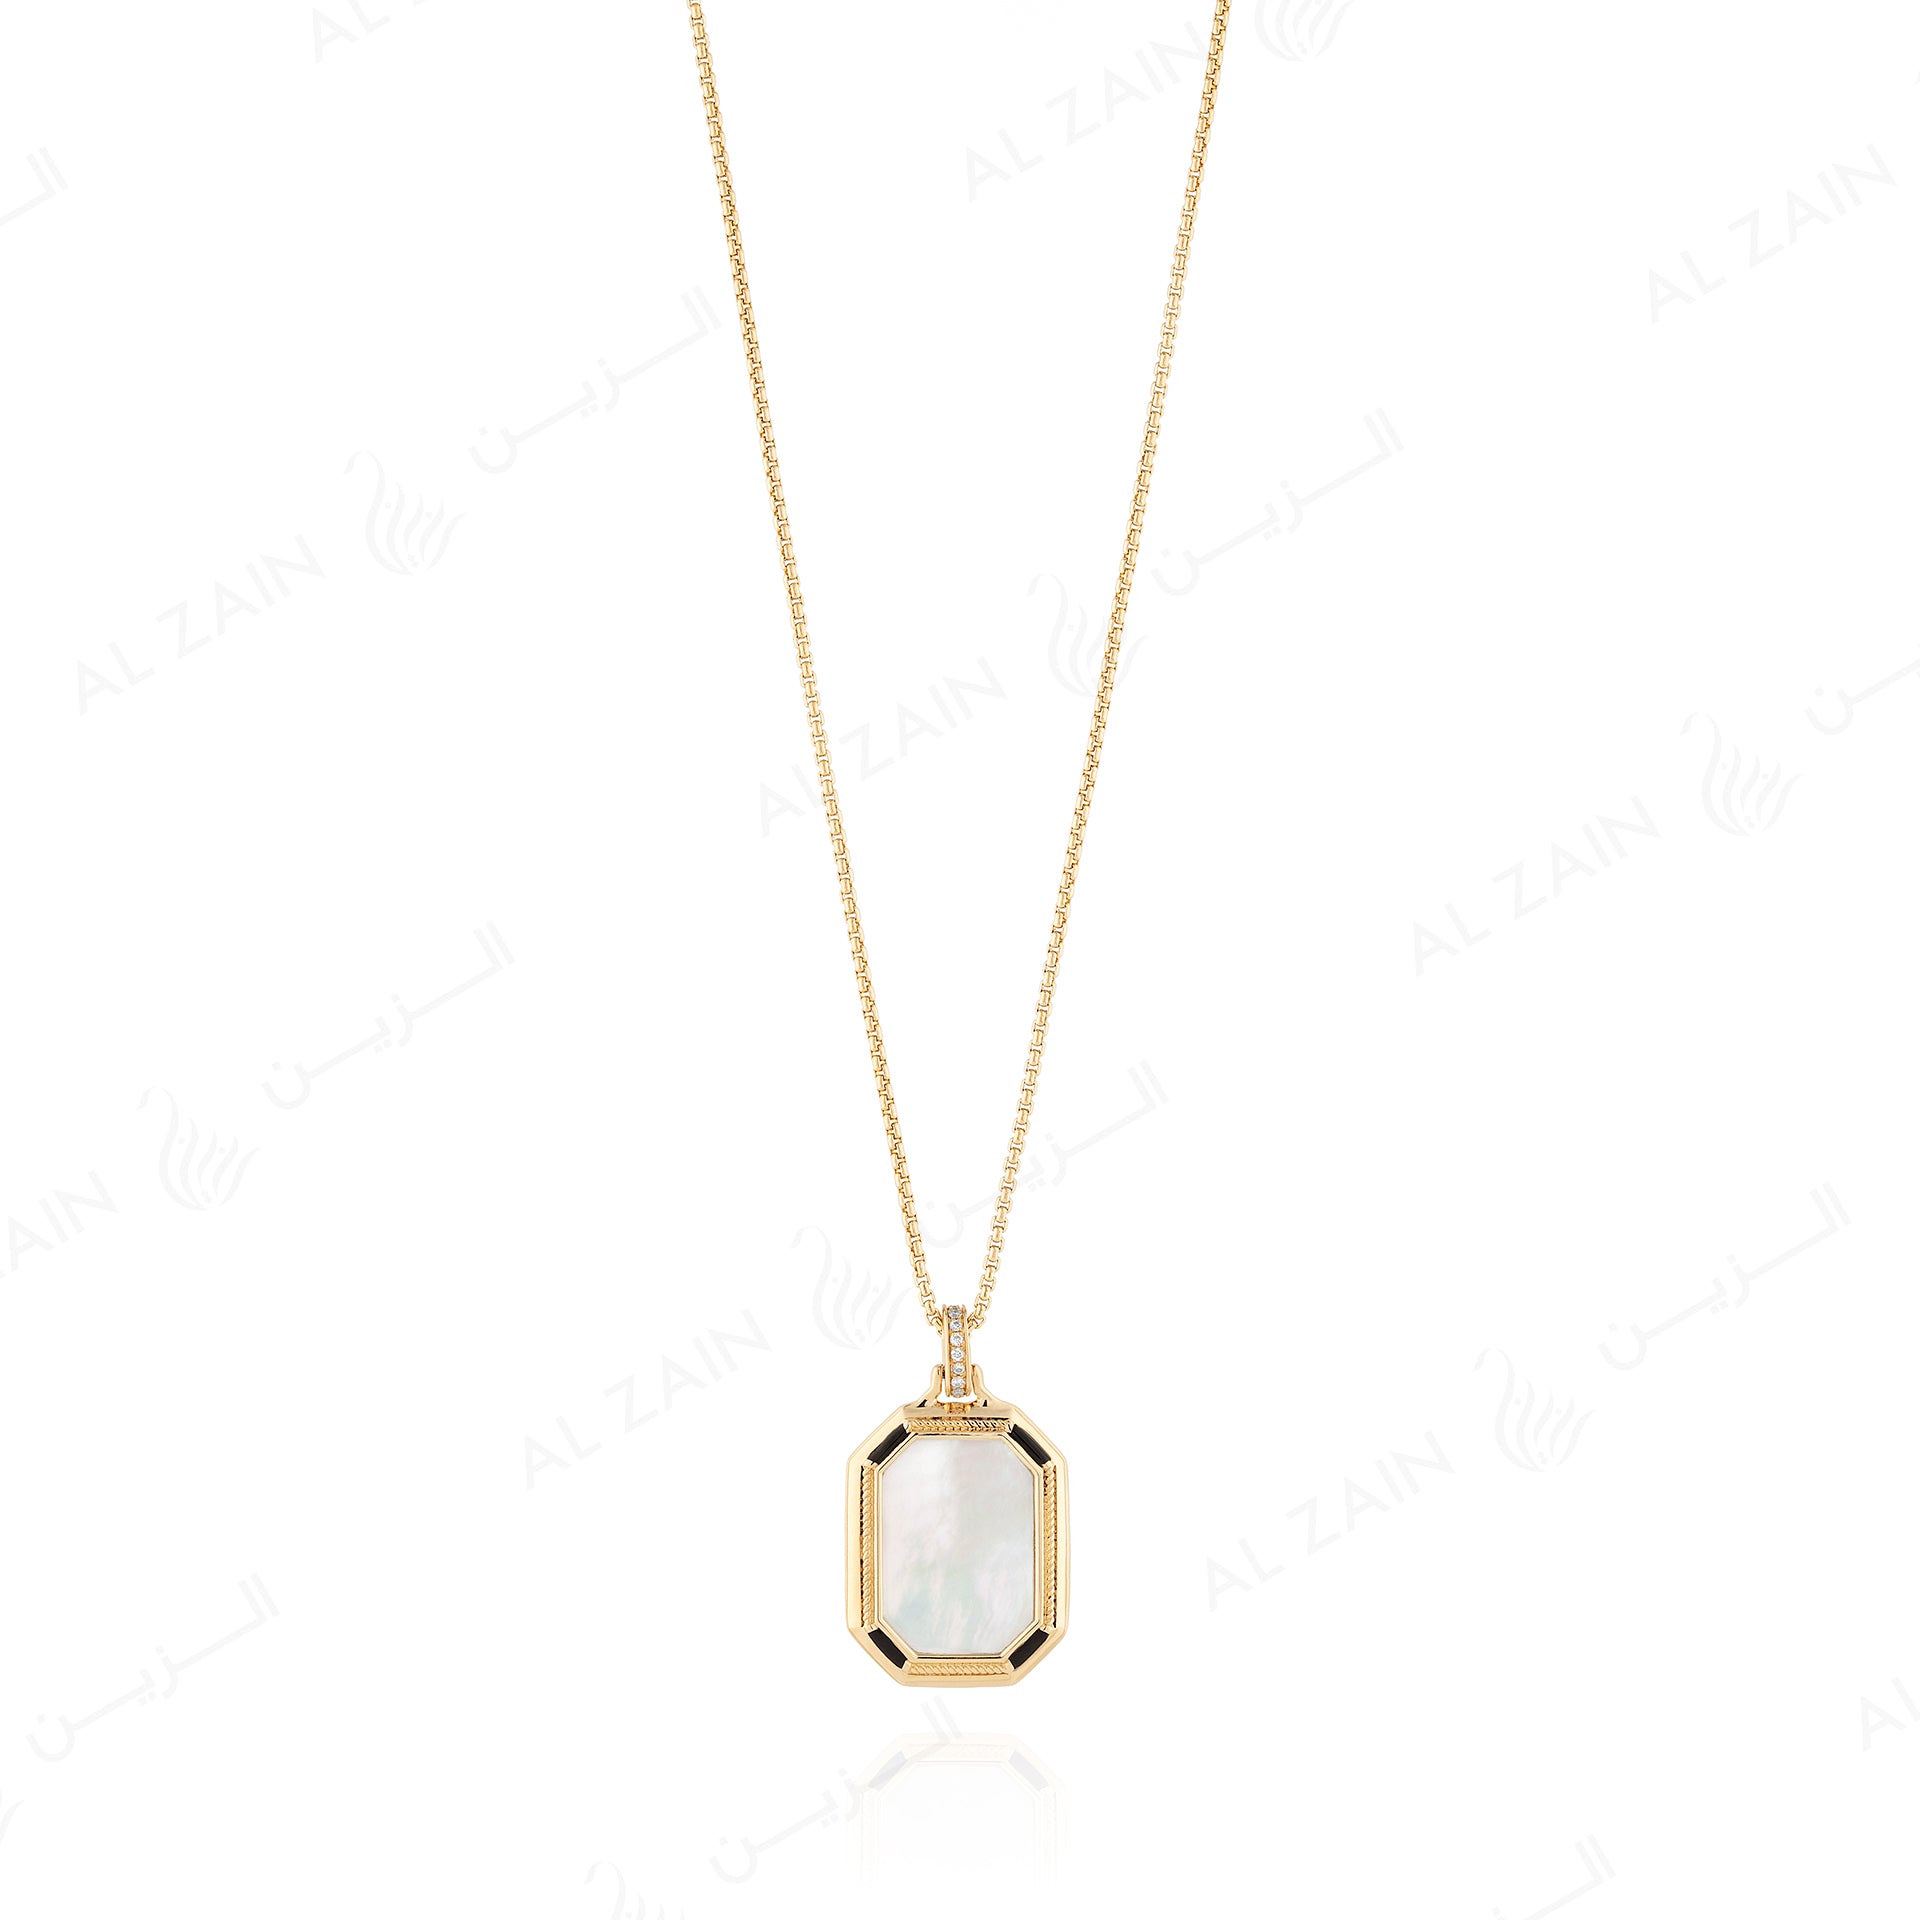 Ayat Al Kursi Necklace in Yellow Gold with Mother of Pearl